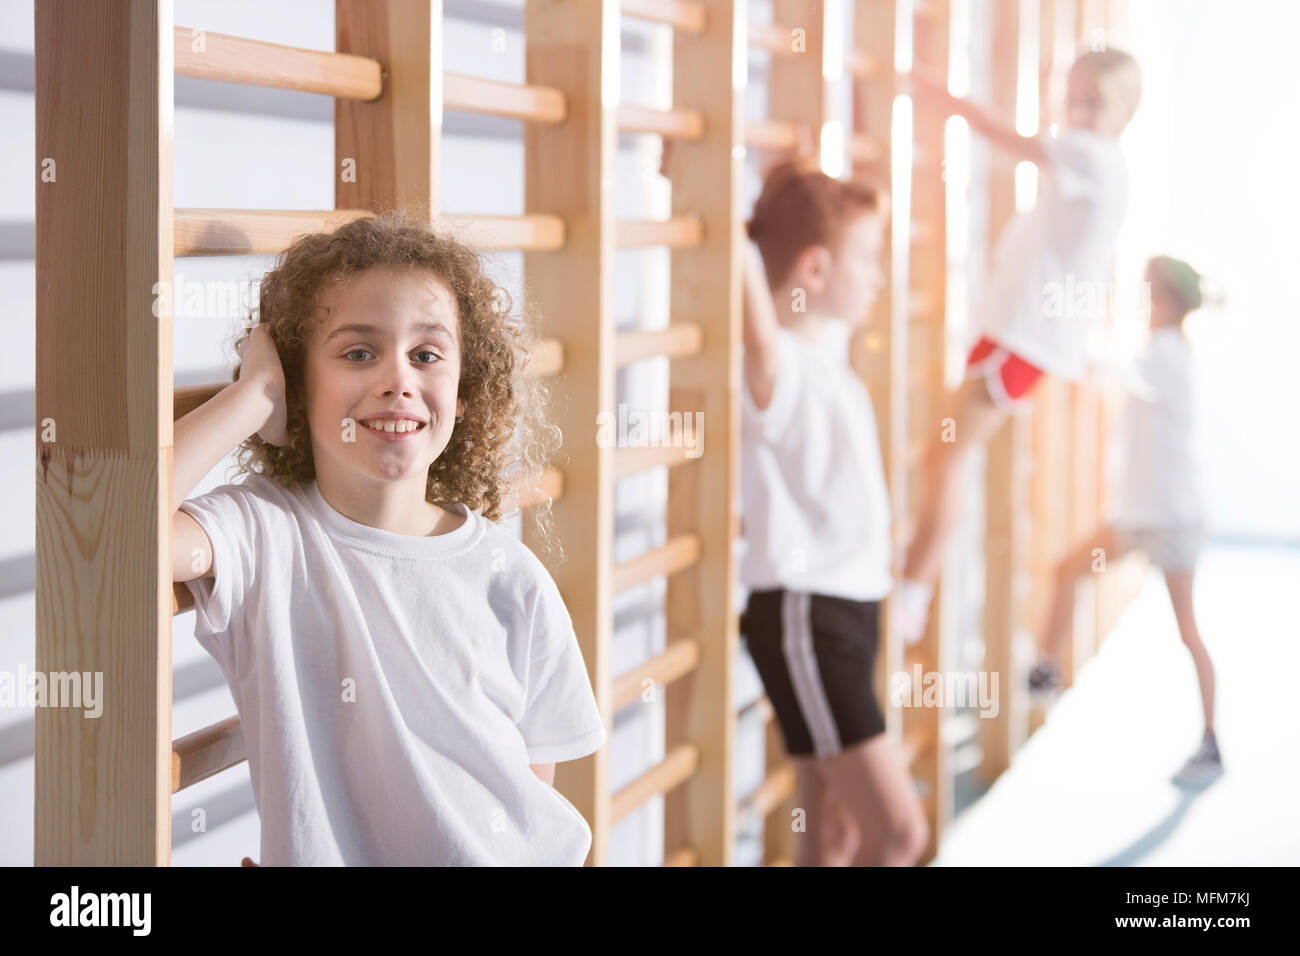 Smiling kid standing next to wall bars at sports hall during training Stock Photo